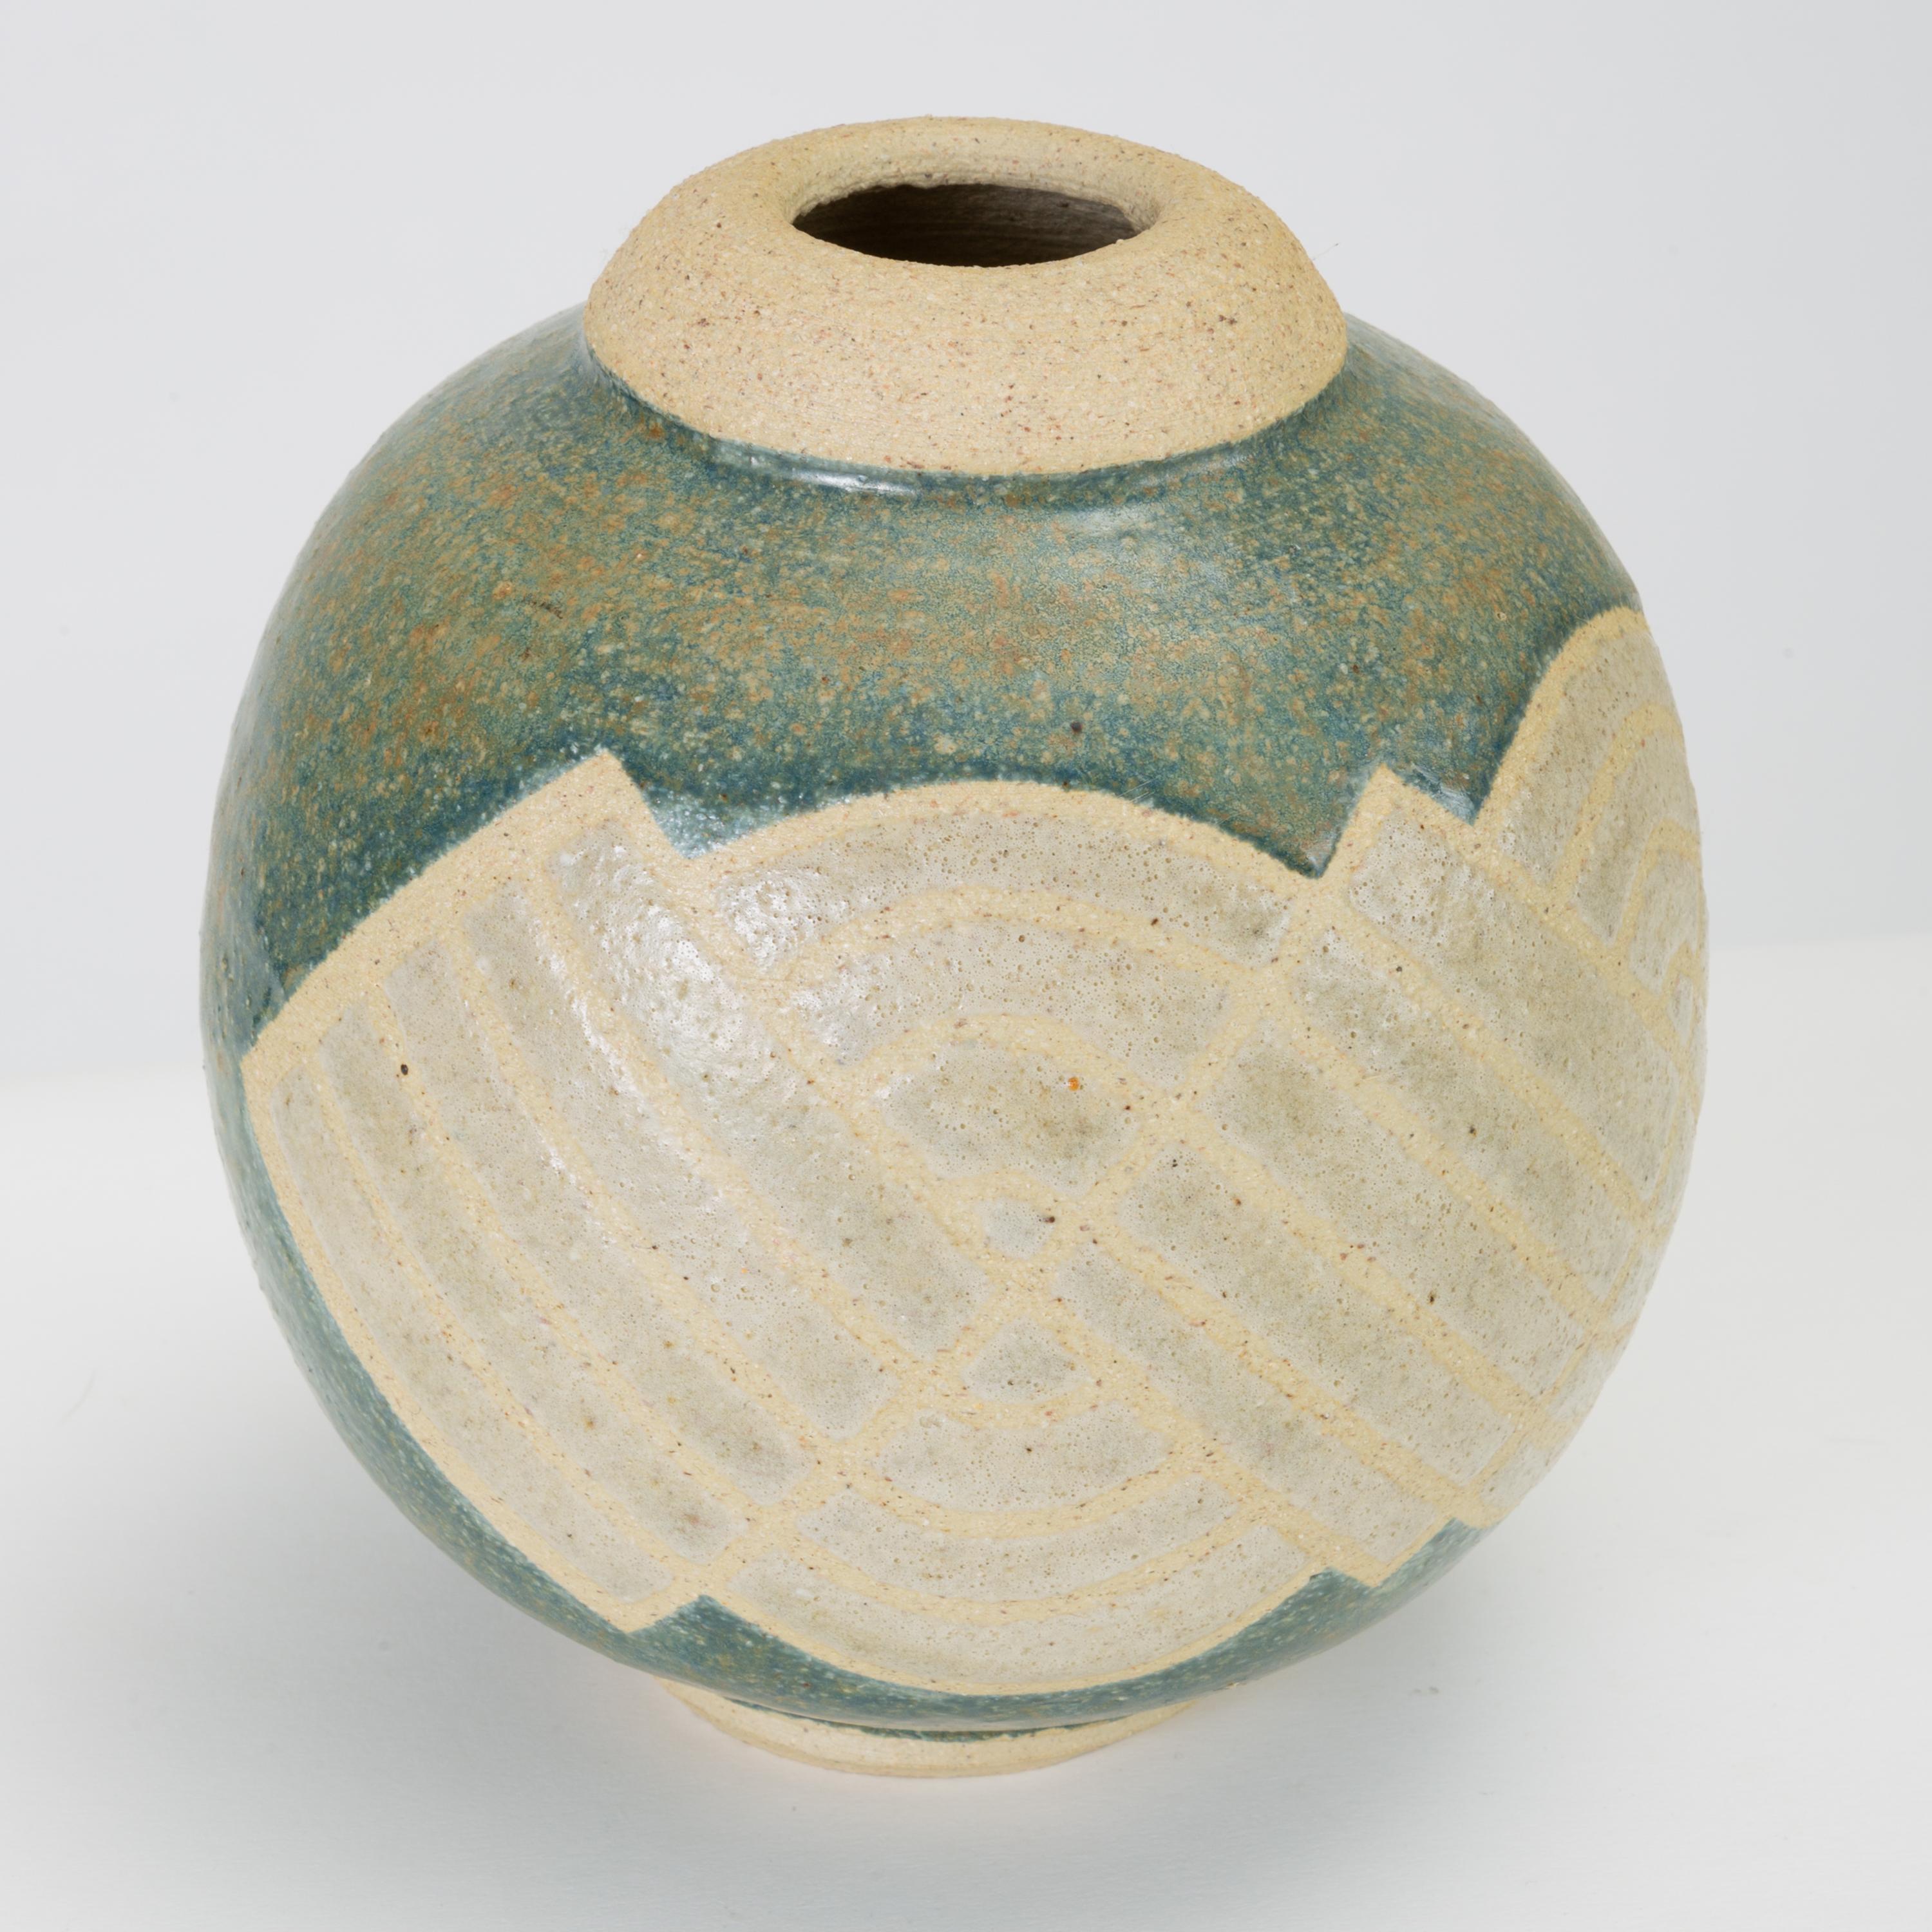 Cream and Blue Vase with Sgraffito Knot Pattern (Keramik)